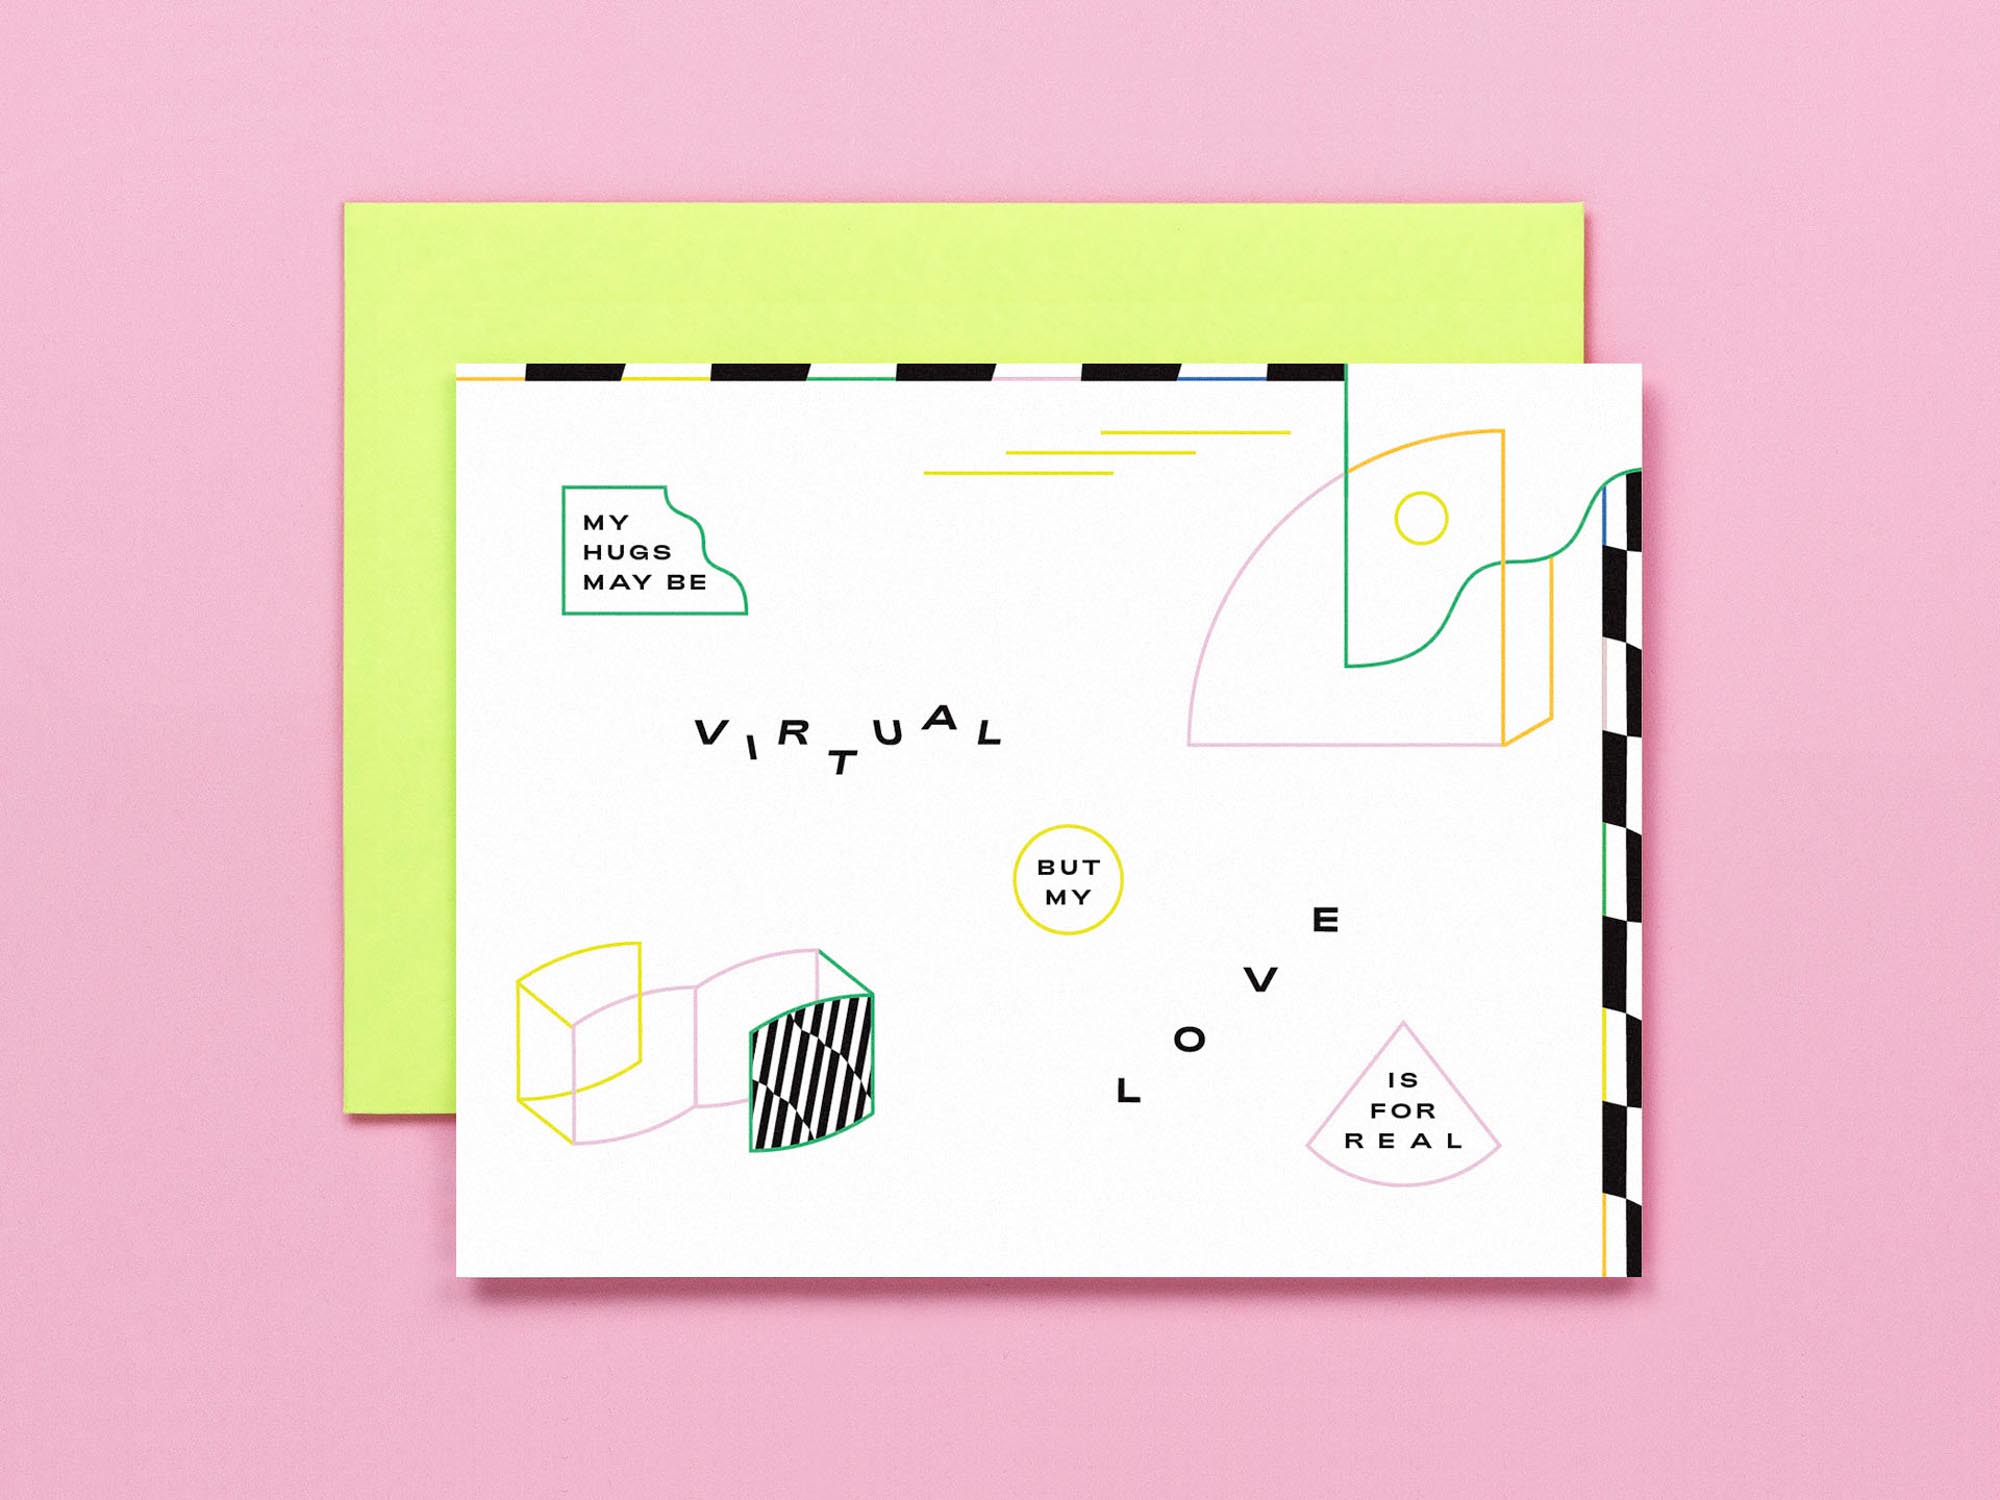 "My hugs may be virtual but my love is for real" pandemic love card that doubles as a long distance relationship card with abstract geometric design. Made in USA by @mydarlin_bk